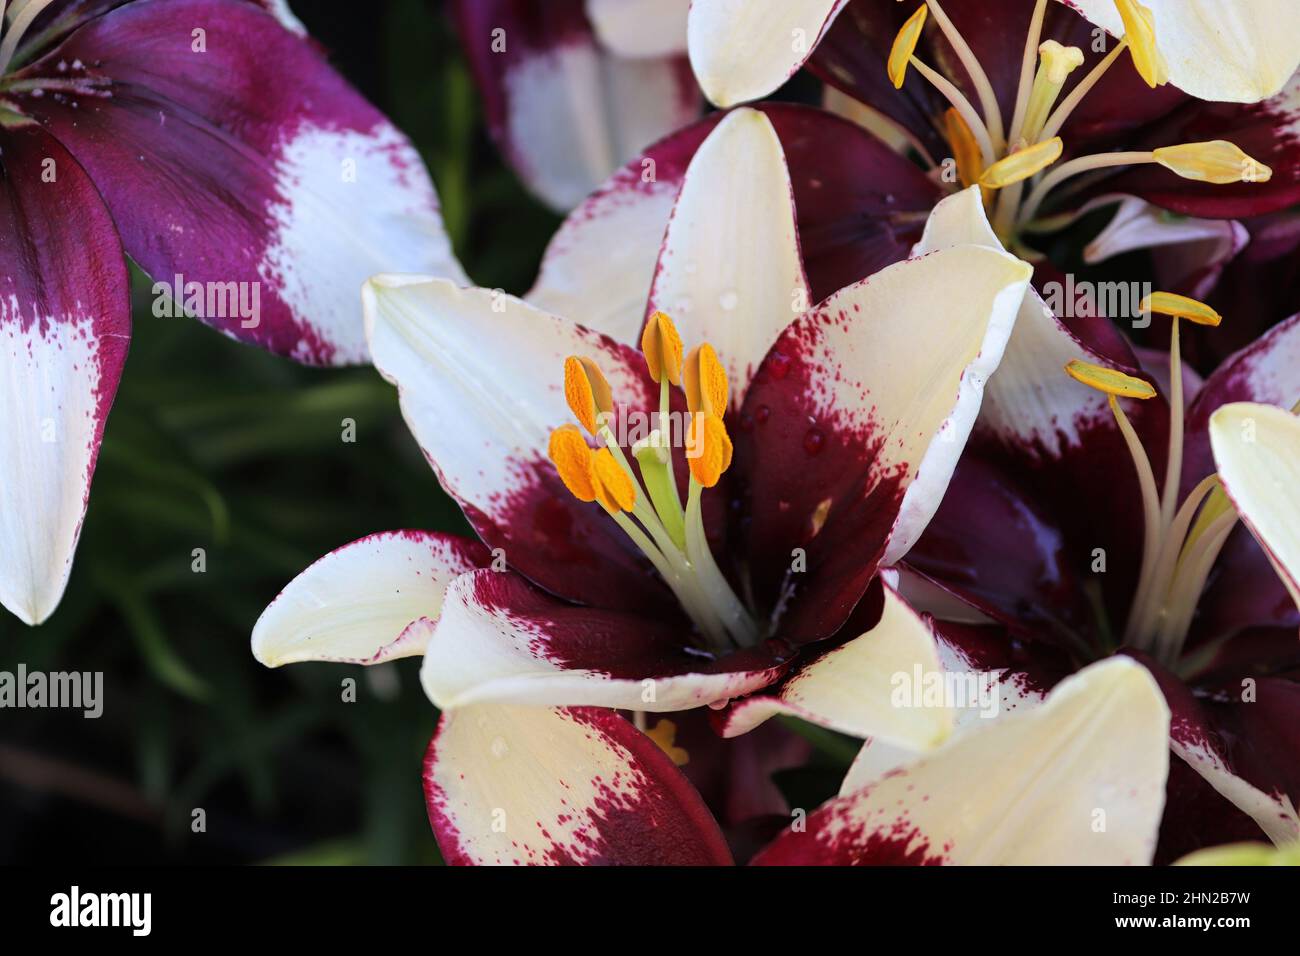 Closeup view of purple and white lily plants Stock Photo